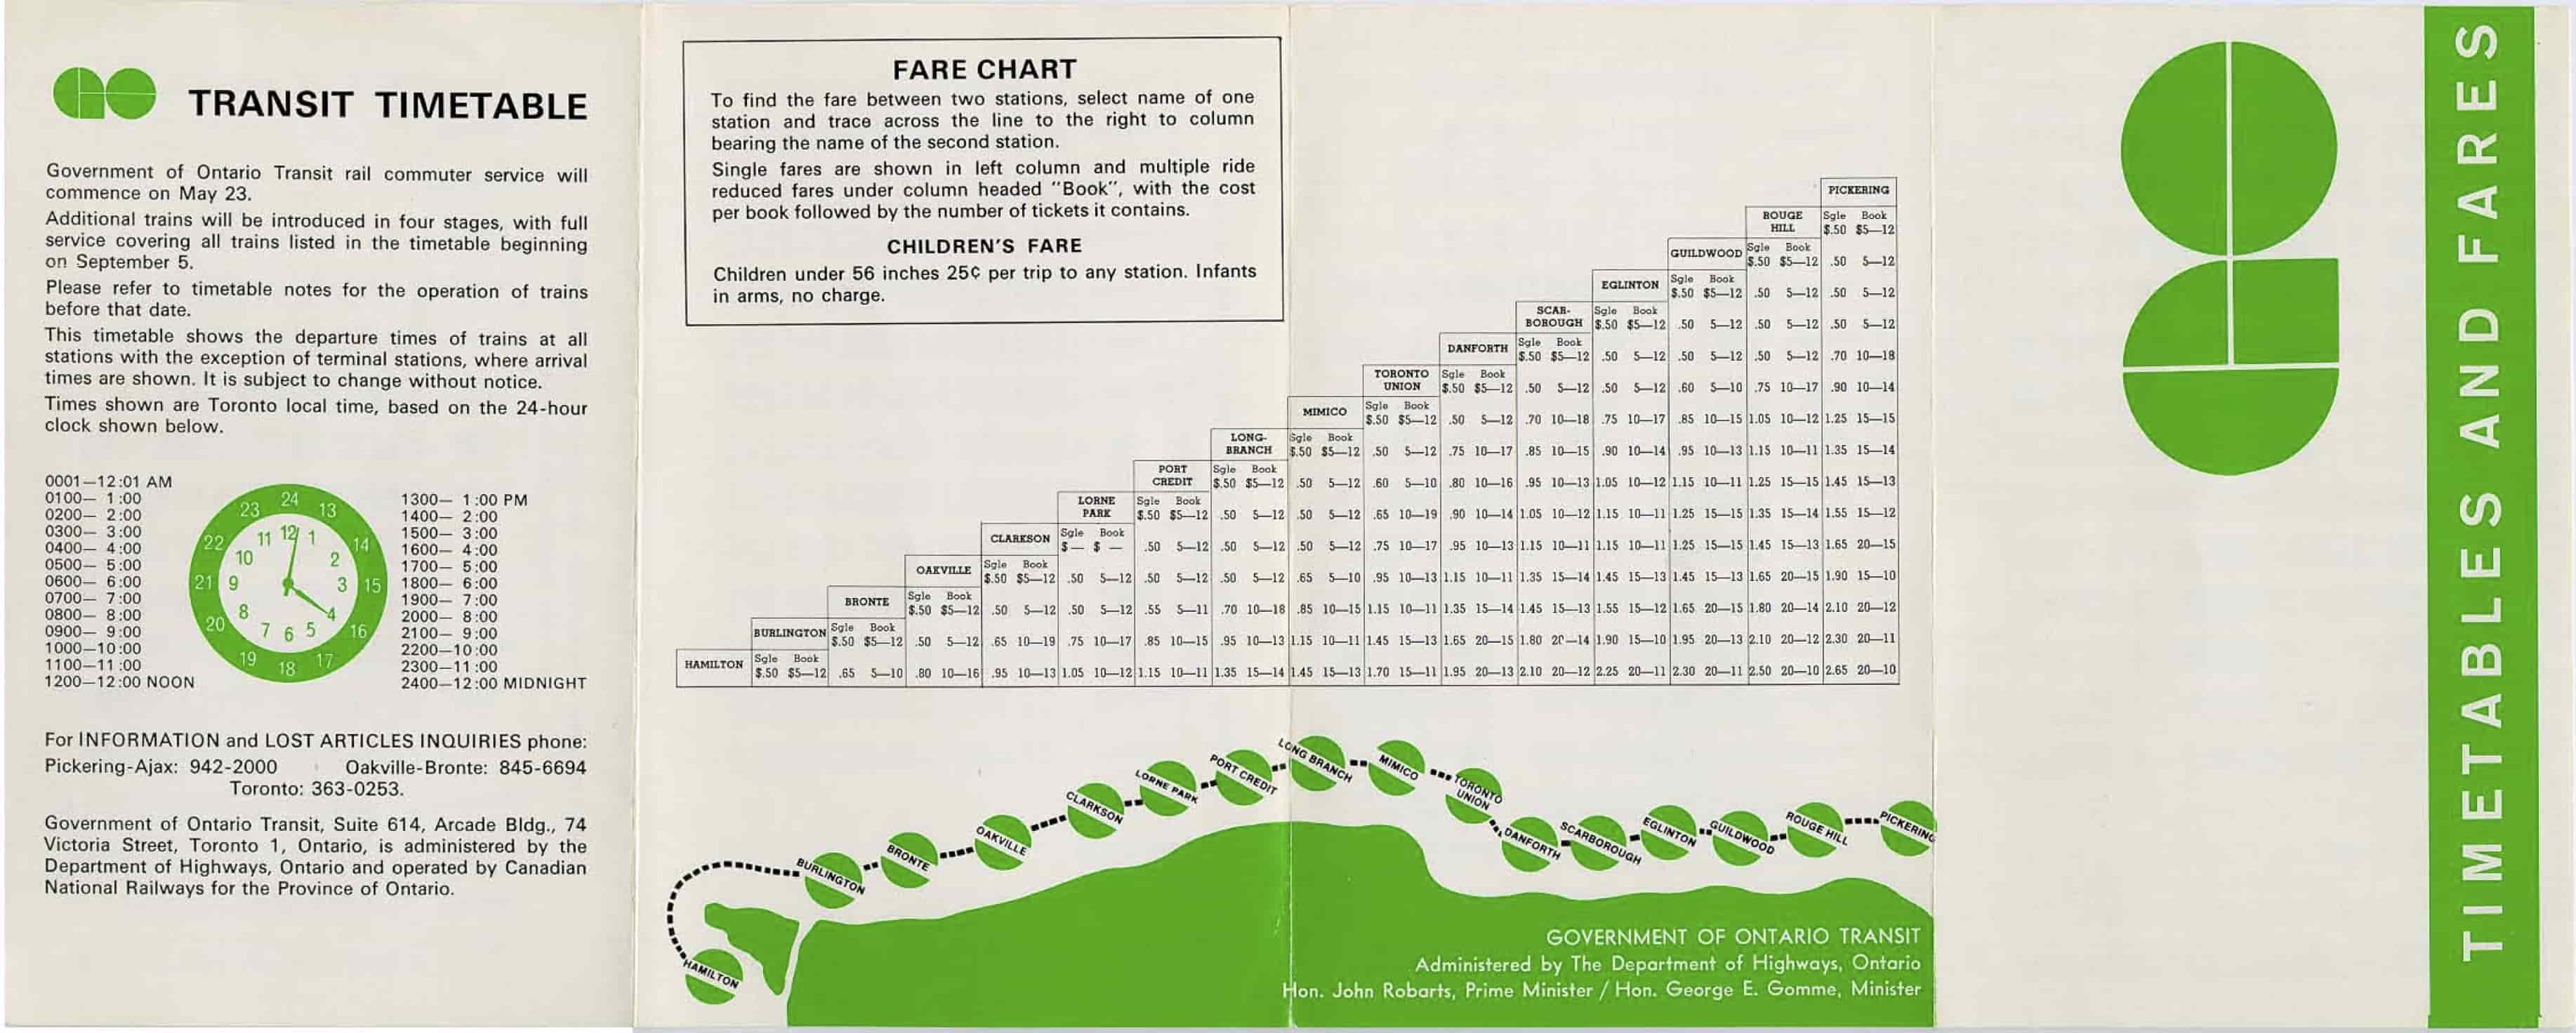 GO transit timetable 1960s page 3